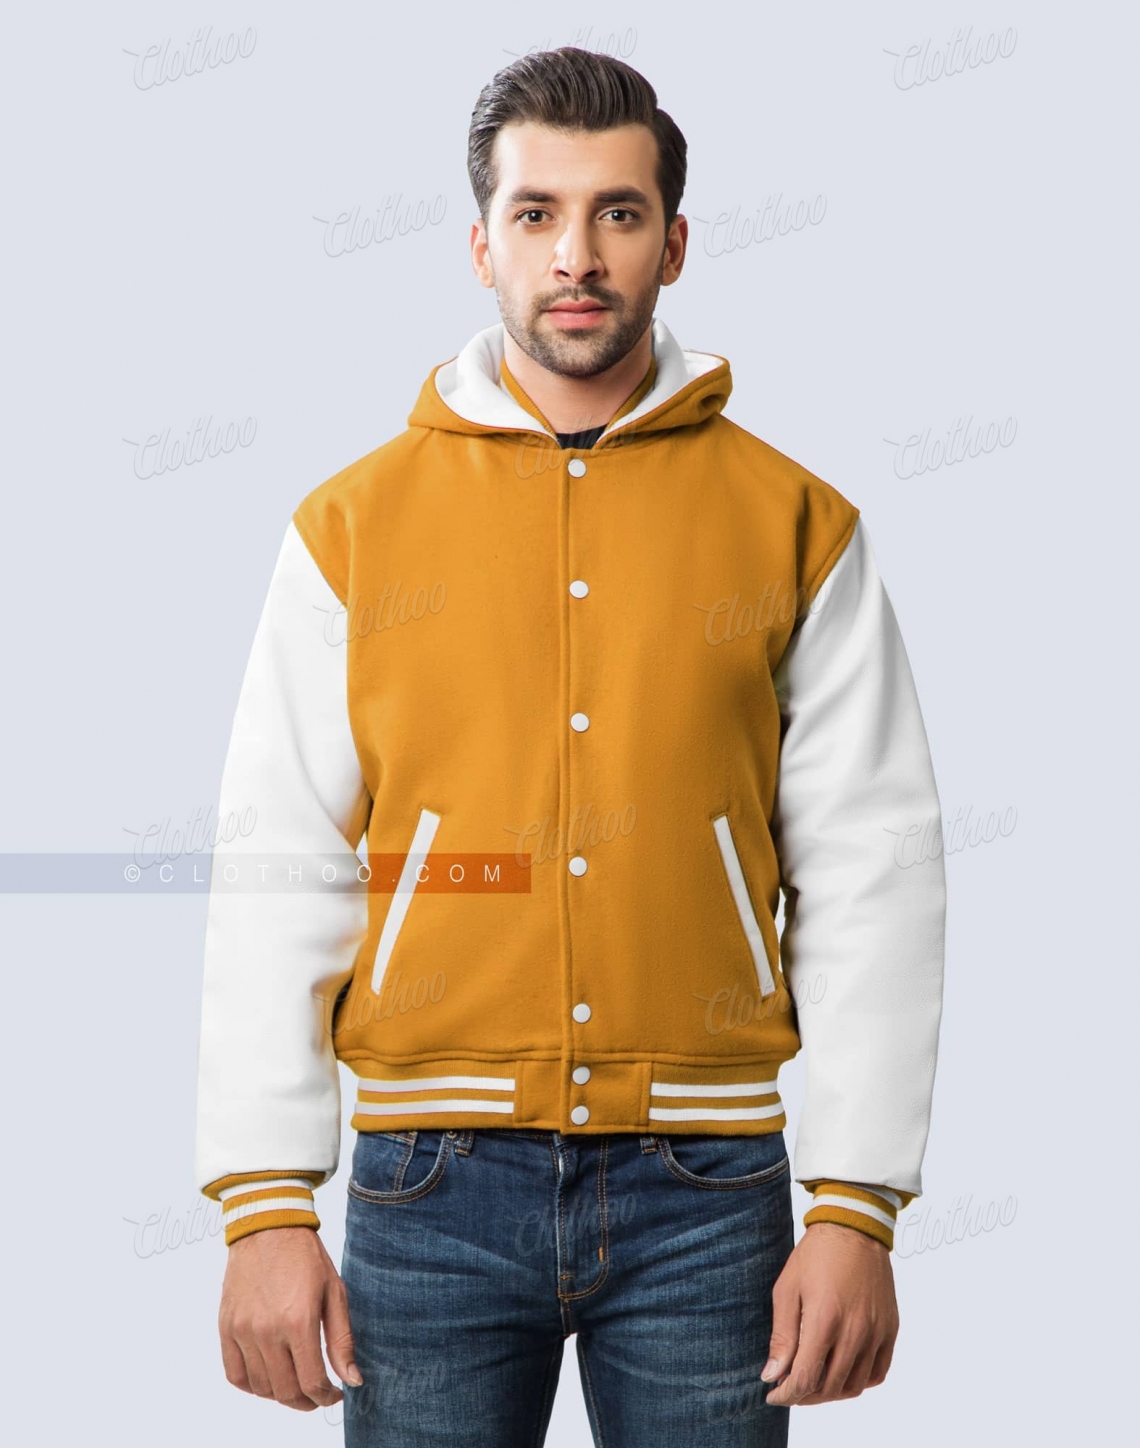 Hooded letterman jacket in gold and white